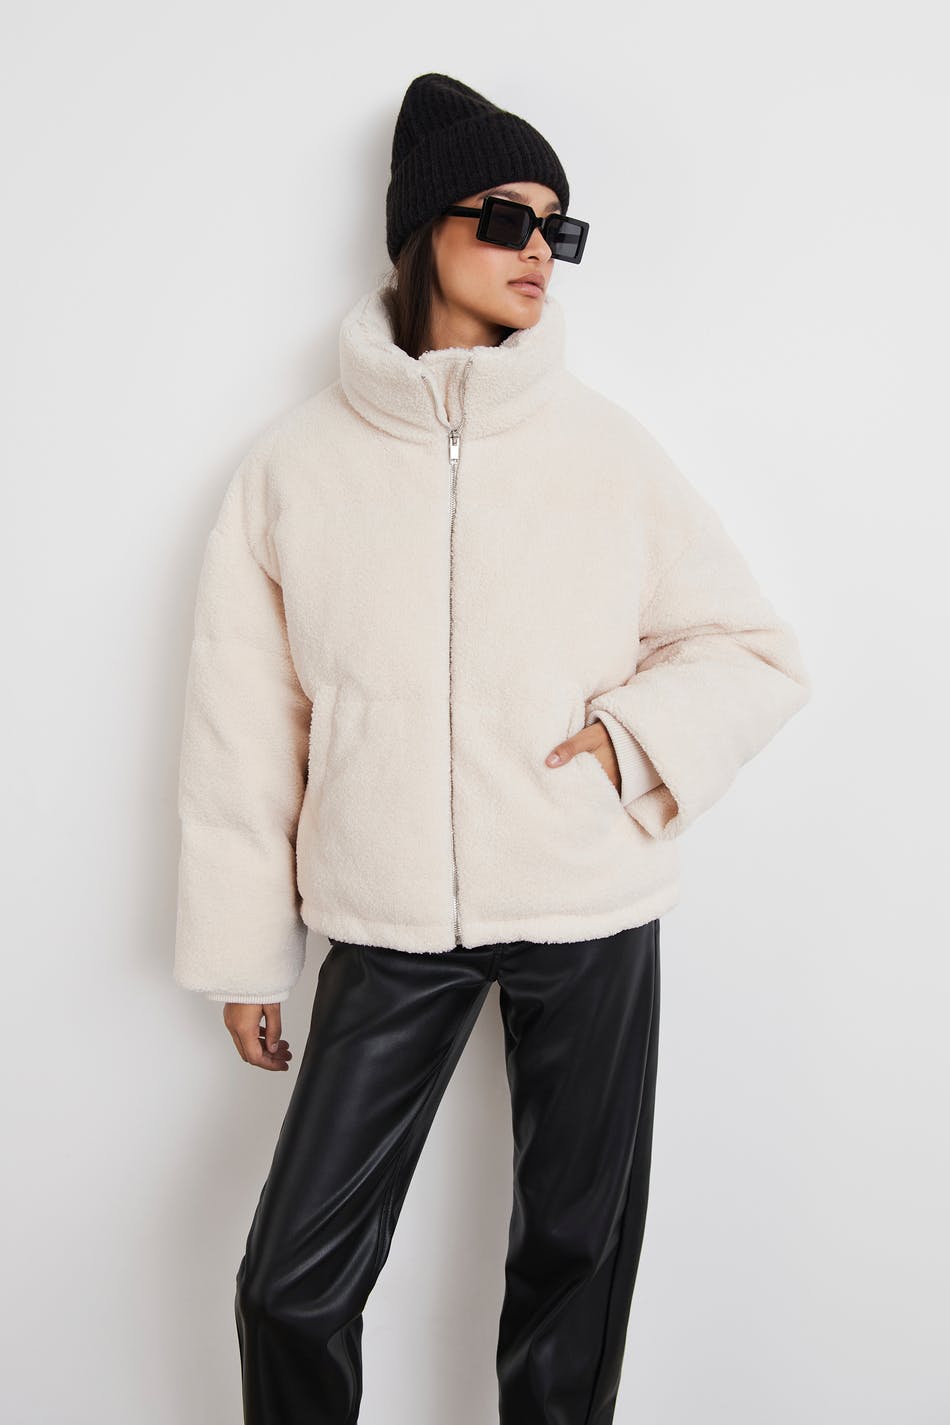 Teddy puffer jacket, Gina Tricot